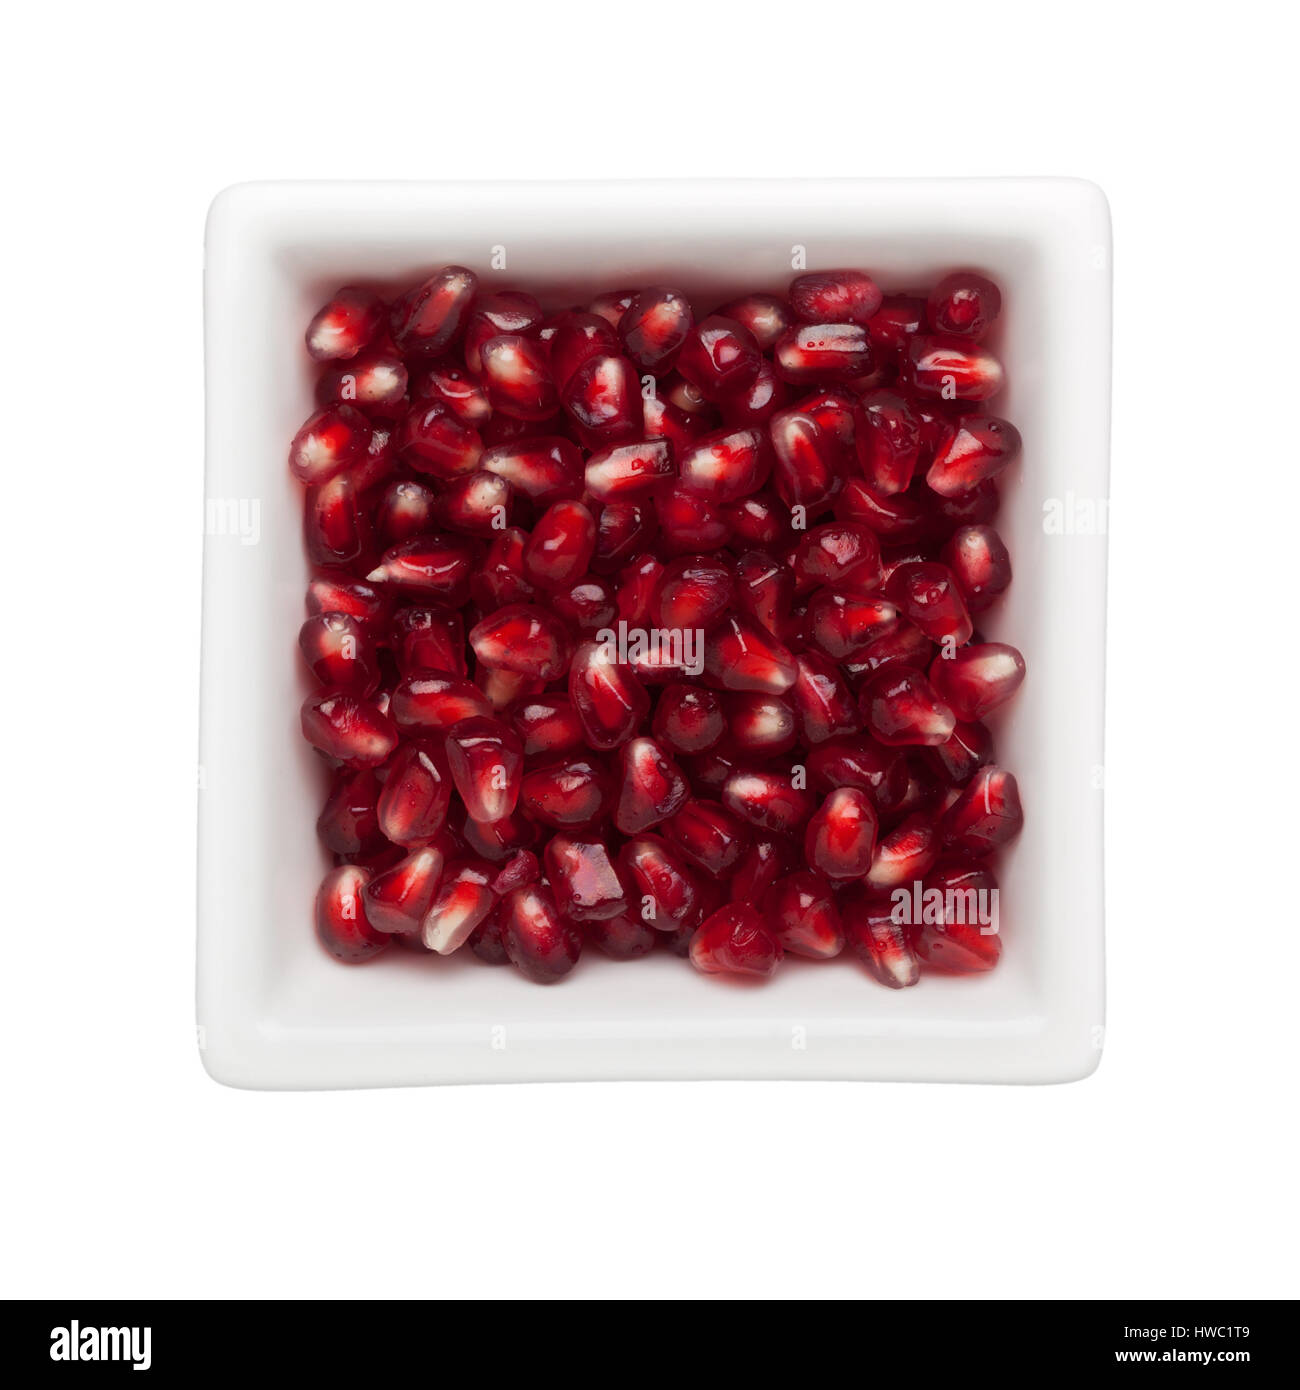 Pomegranate arils in a square bowl isolated on white background Stock Photo